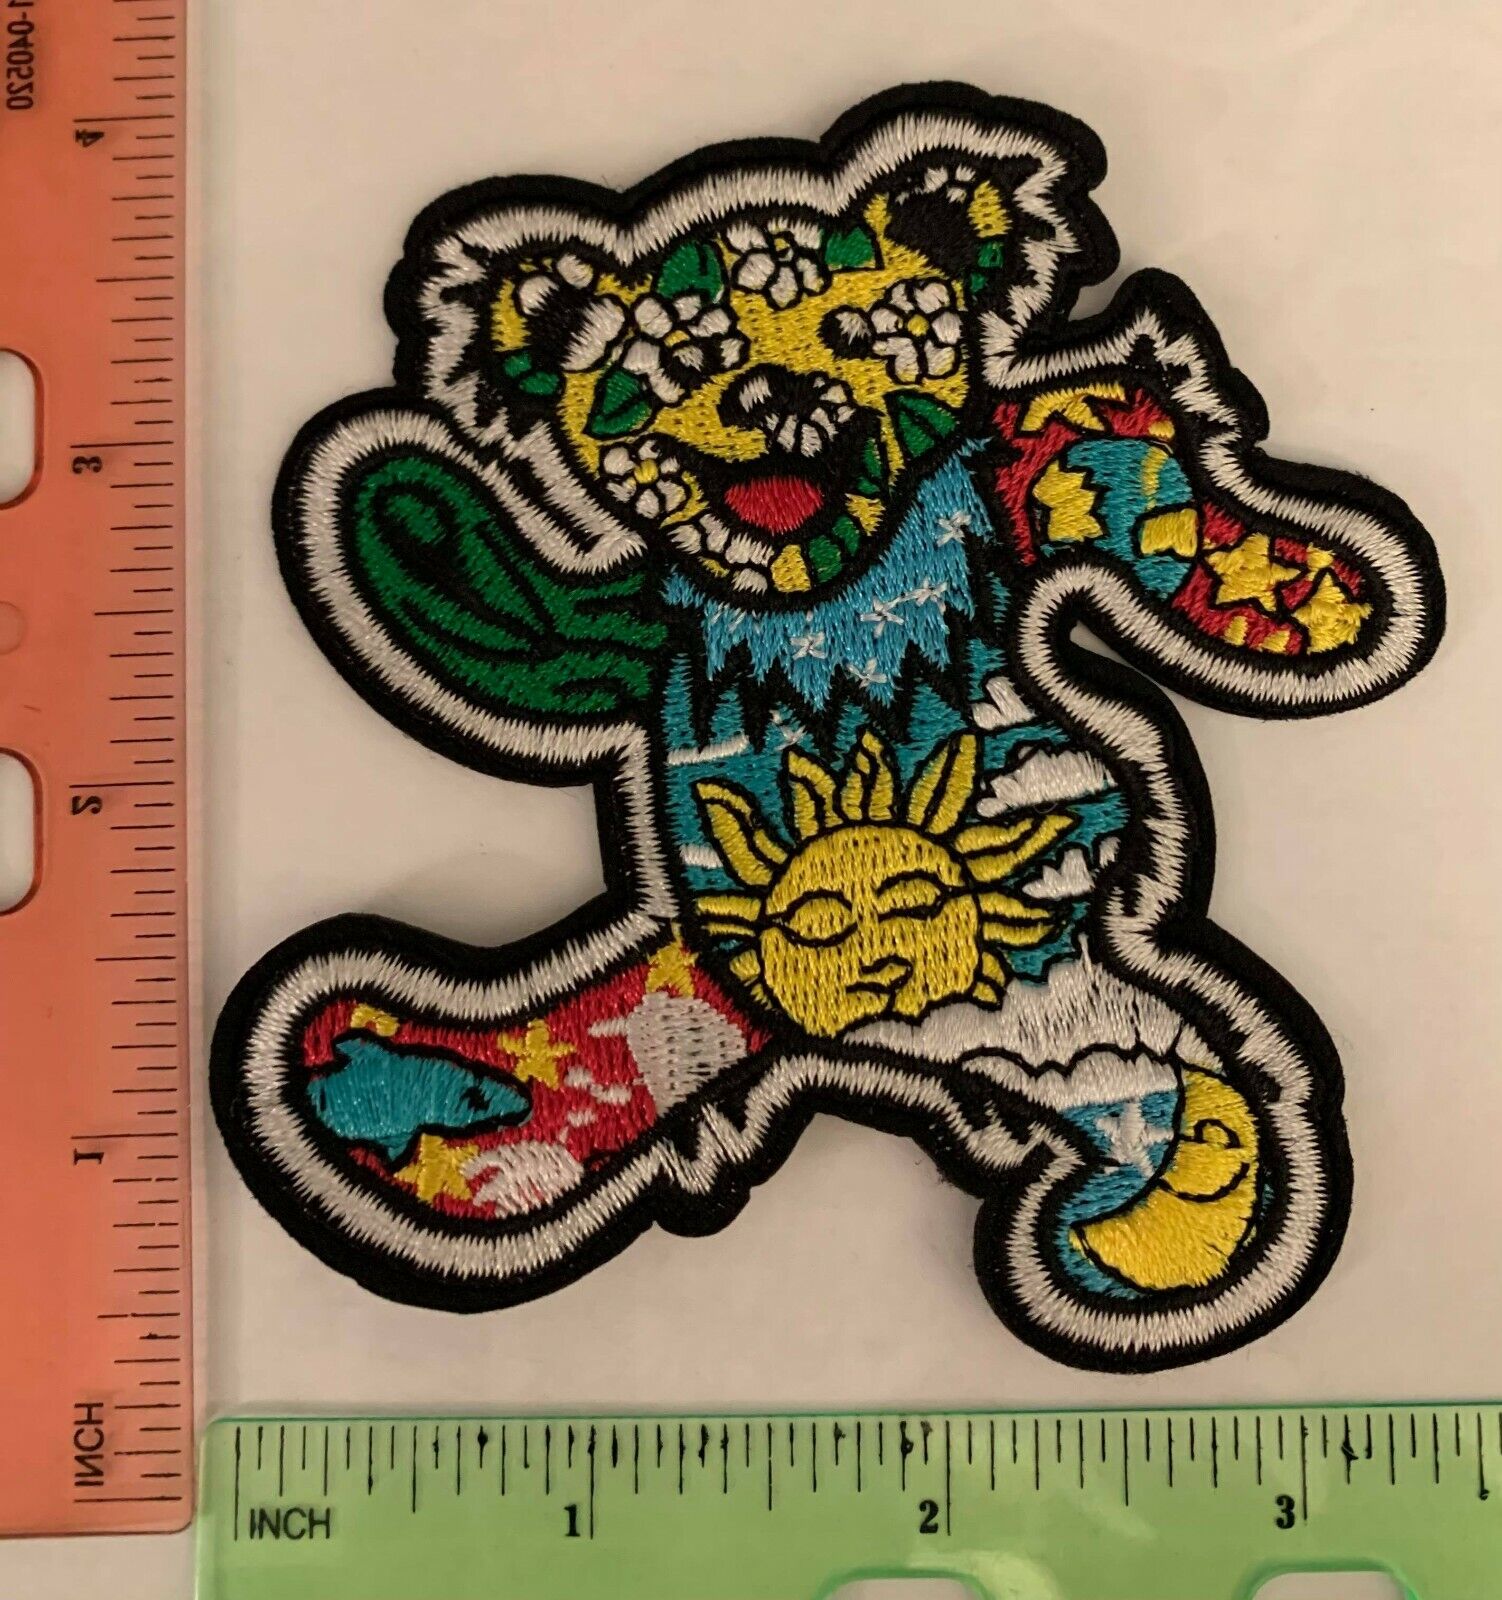 The Grateful Dead Bear Iron-on Embroidered Hard Rock Band Patch #250